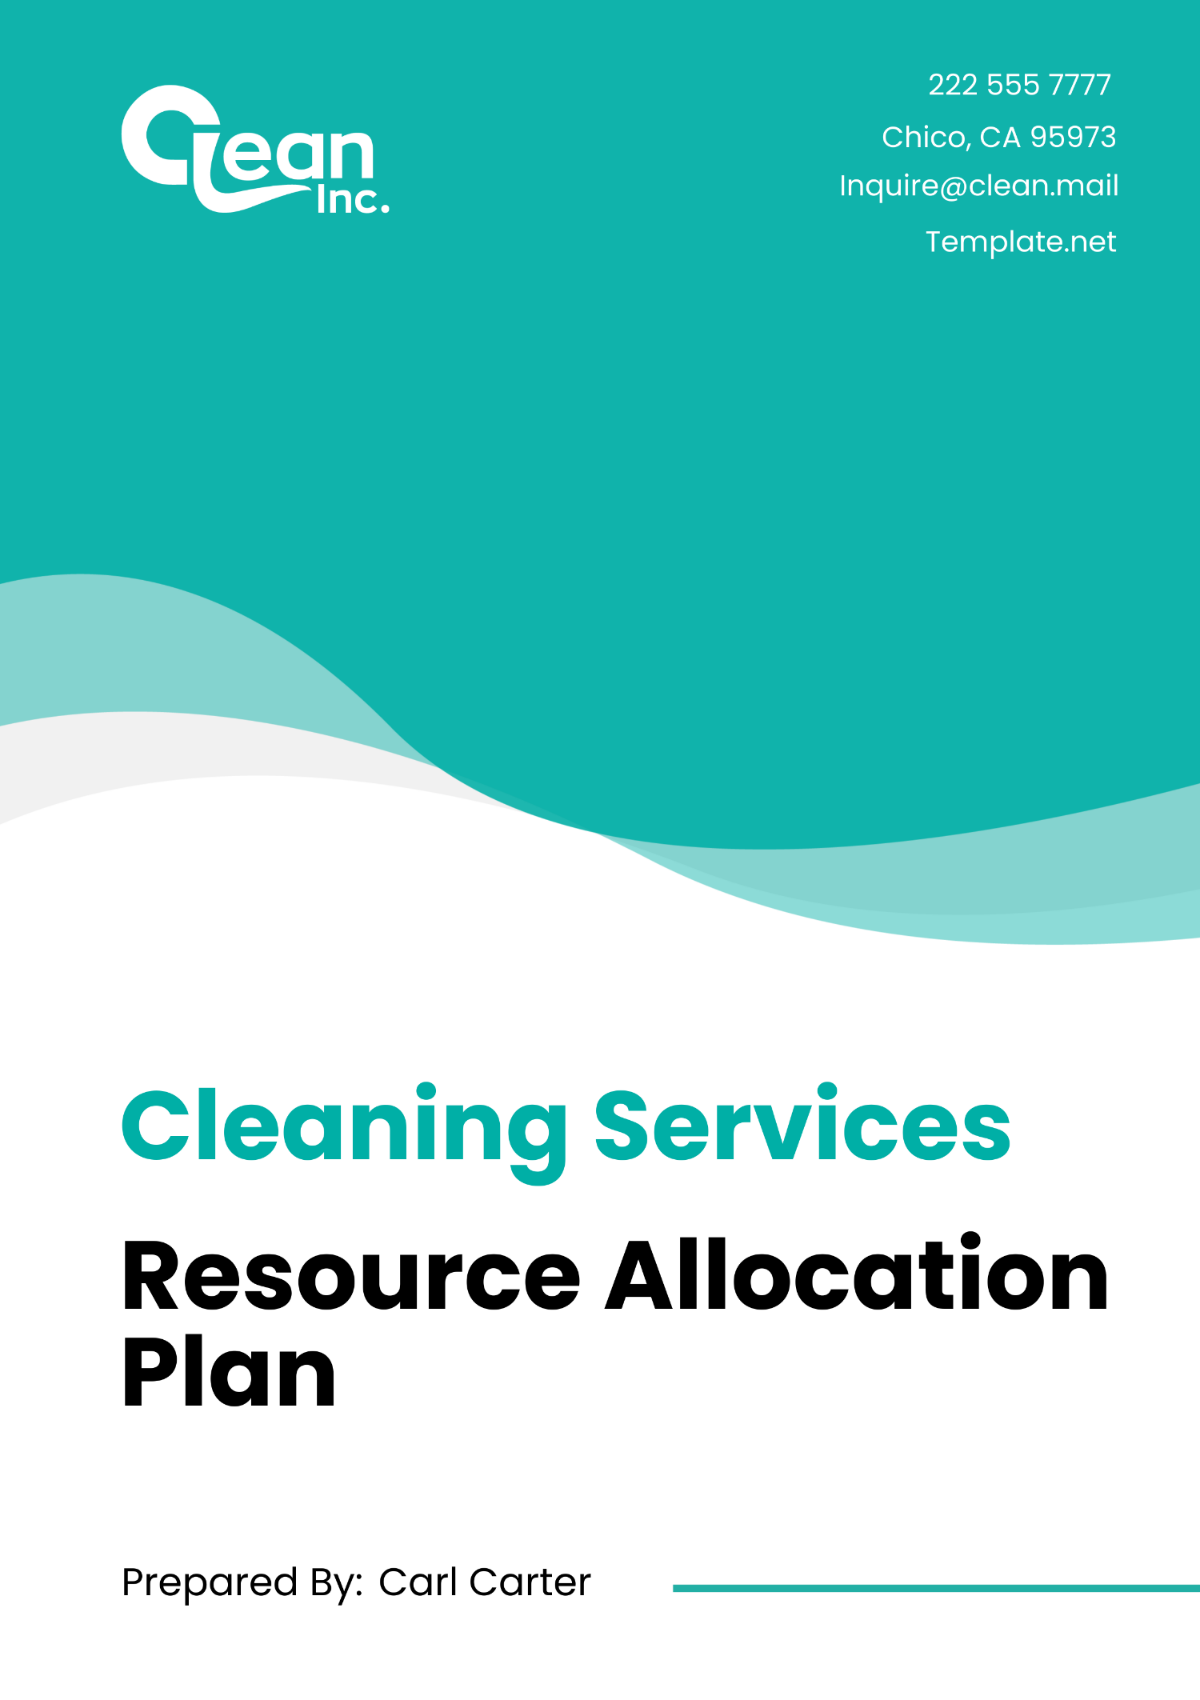 Cleaning Services Resource Allocation Plan Template